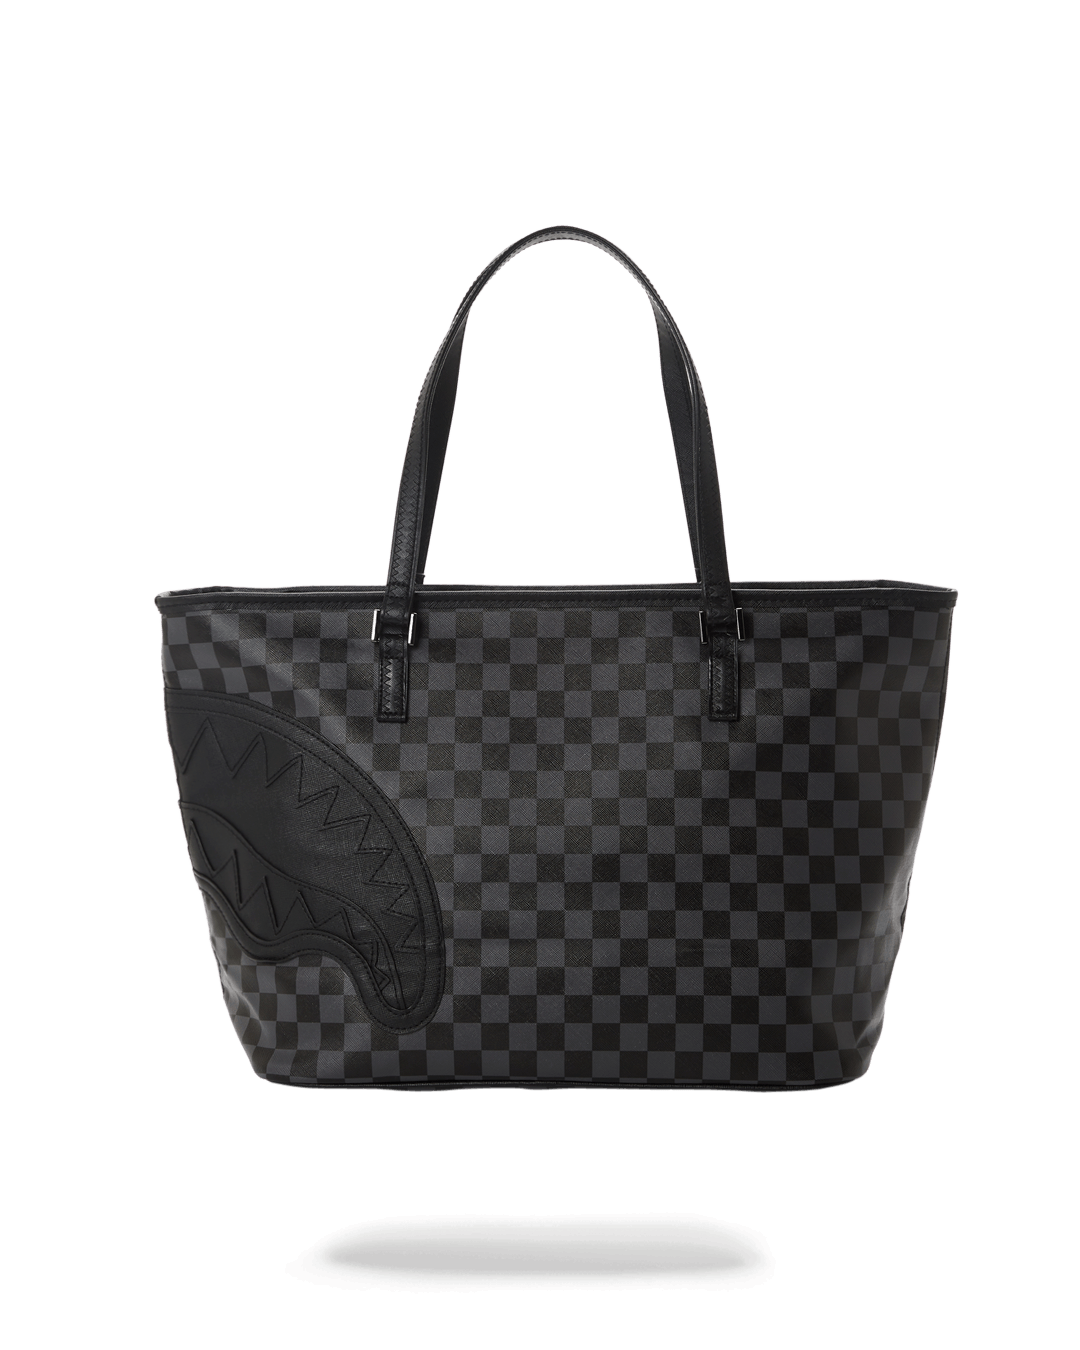 HENNY BLACK TOTE - HIGH QUALITY AND INEXPENSIVE - HENNY BLACK TOTE HIGH QUALITY AND INEXPENSIVE-01-4